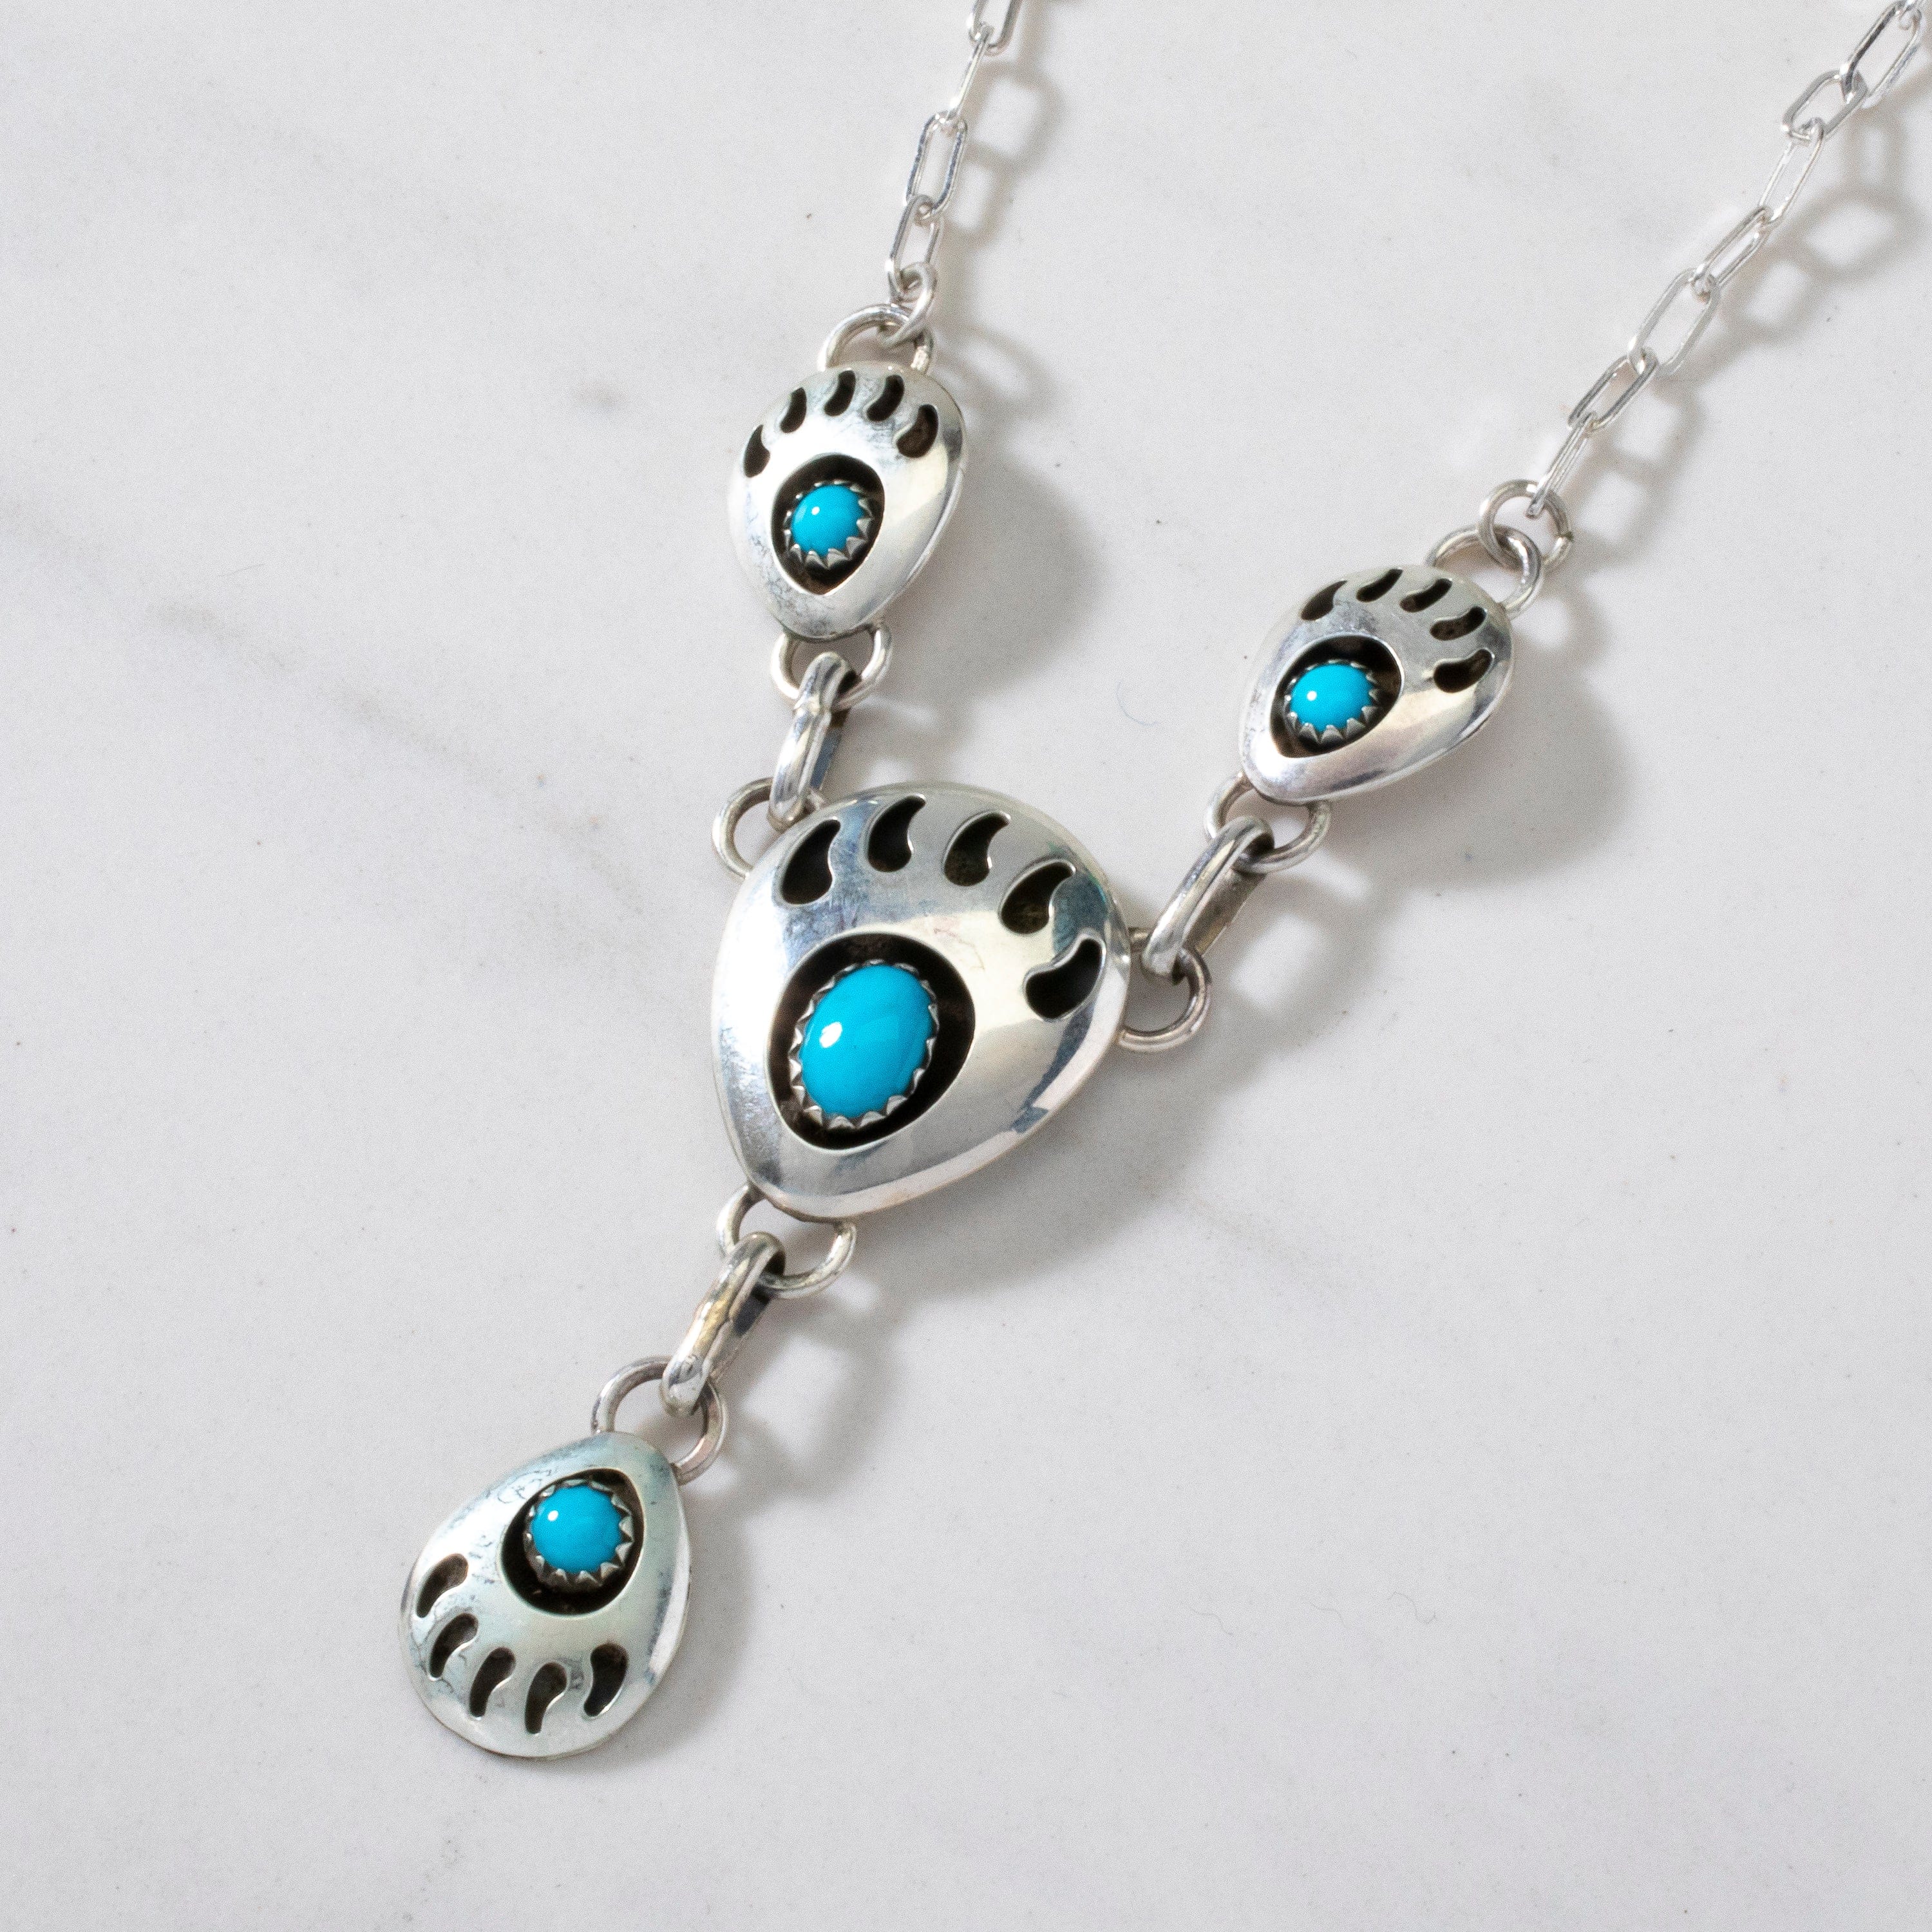 Kalifano Native American Jewelry 16" Sleeping Beauty Turquoise Bear Claw USA Native American Made 925 Sterling Silver Necklace NAN300.011